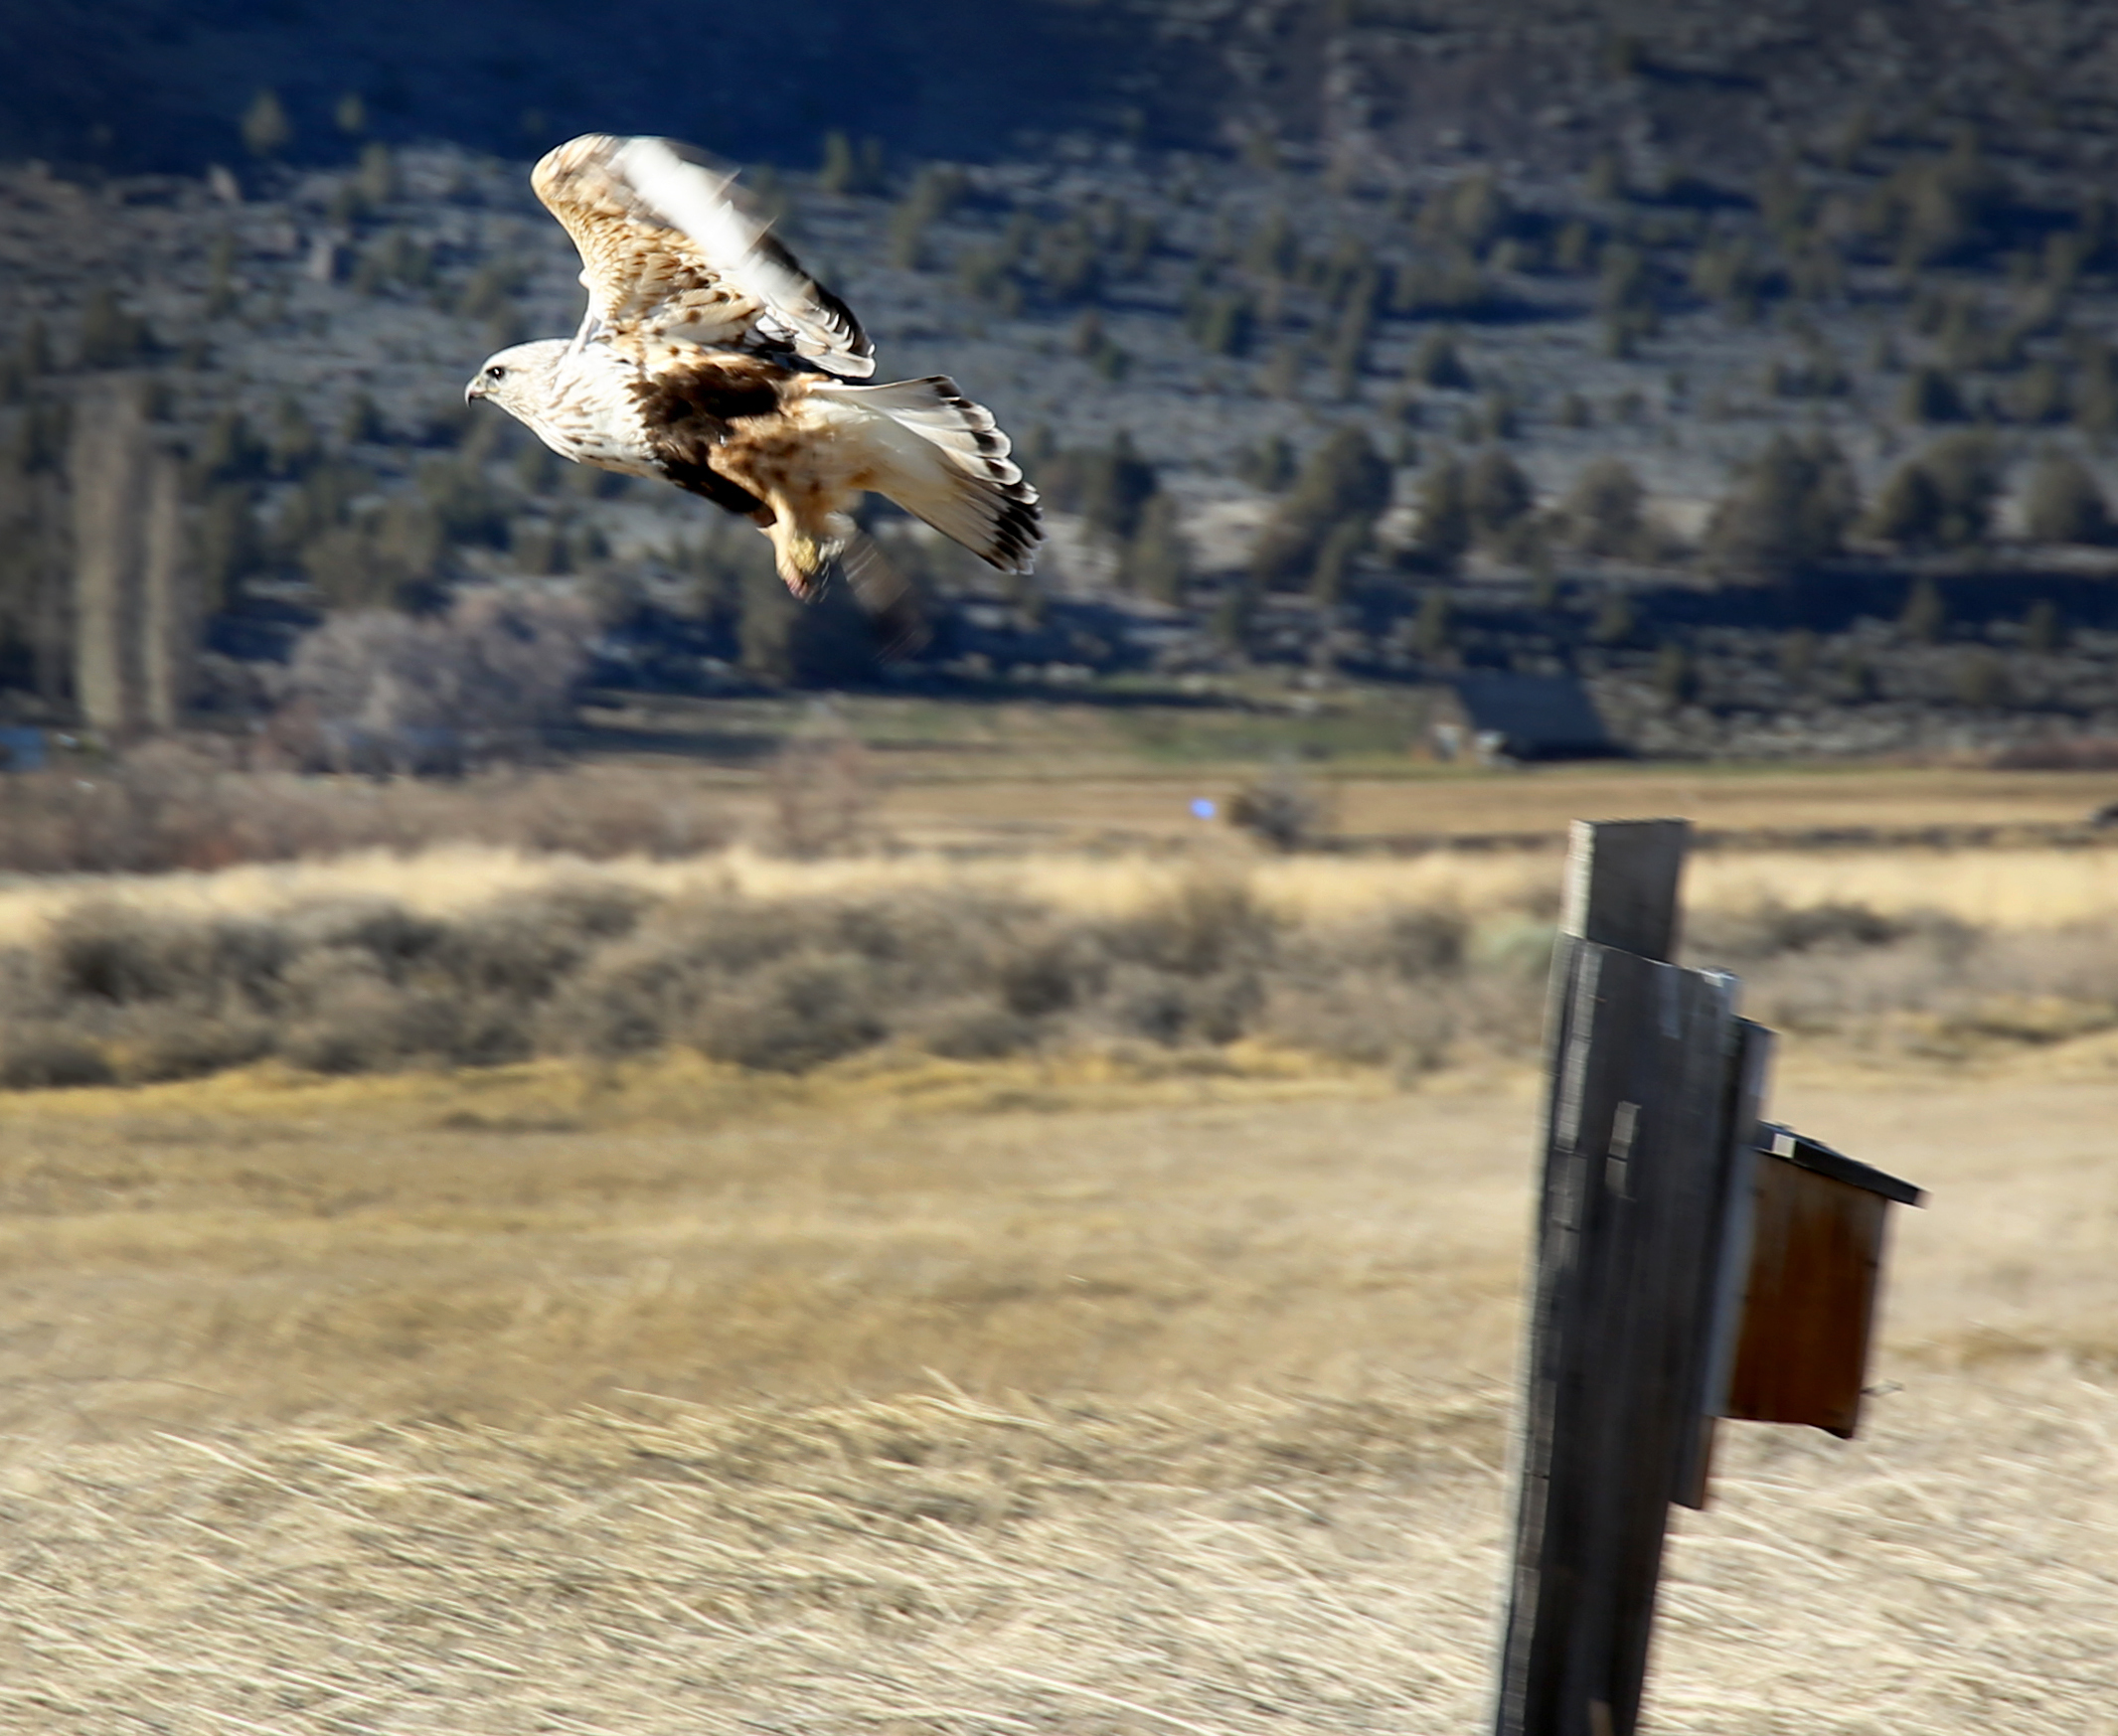 A Northern rough-legged hawk is a winter visitor to Summer Lake Wildlife Area on Feb. 18, 2022. The species migrates from breeding sites in the Arctic around mid- to late October and usually departs in March or April. 